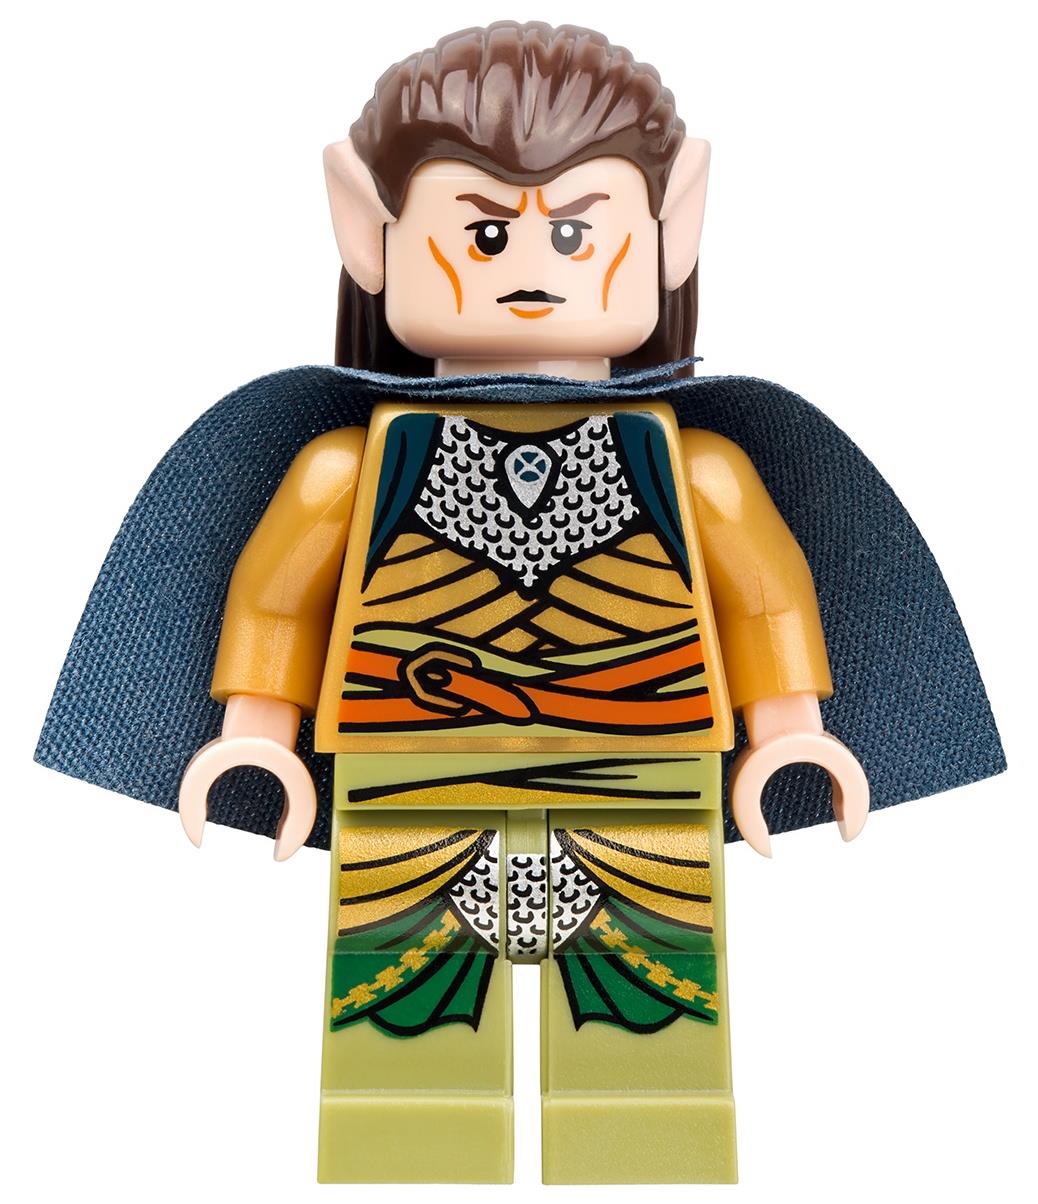 Lego Elrond polybag LotR # 5000202 Lord of the Rings Hobbit new sealed 